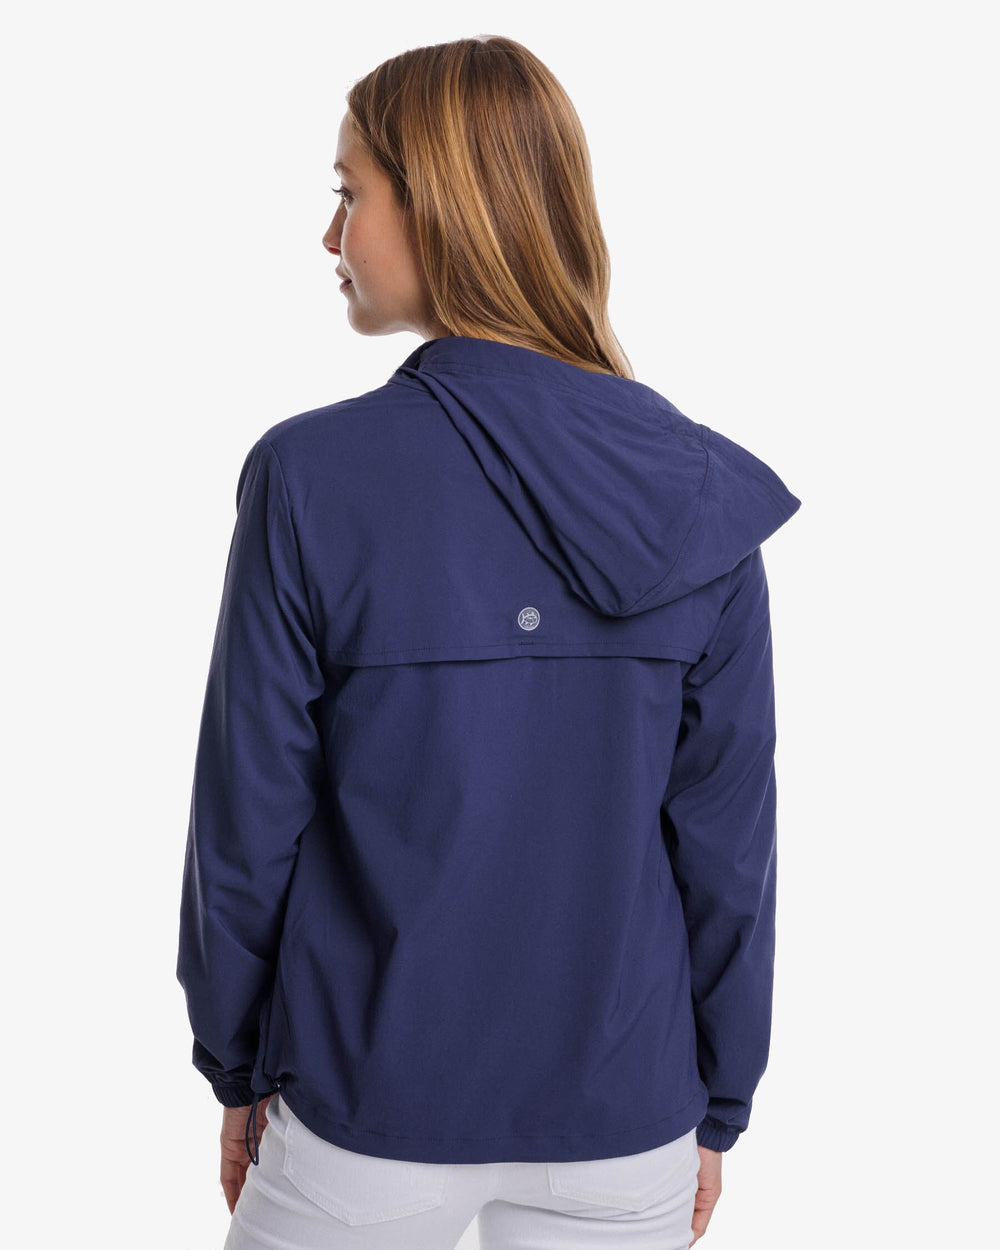 The back view of the Southern Tide Calie Pop Placket Popover by Southern Tide - Nautical Navy